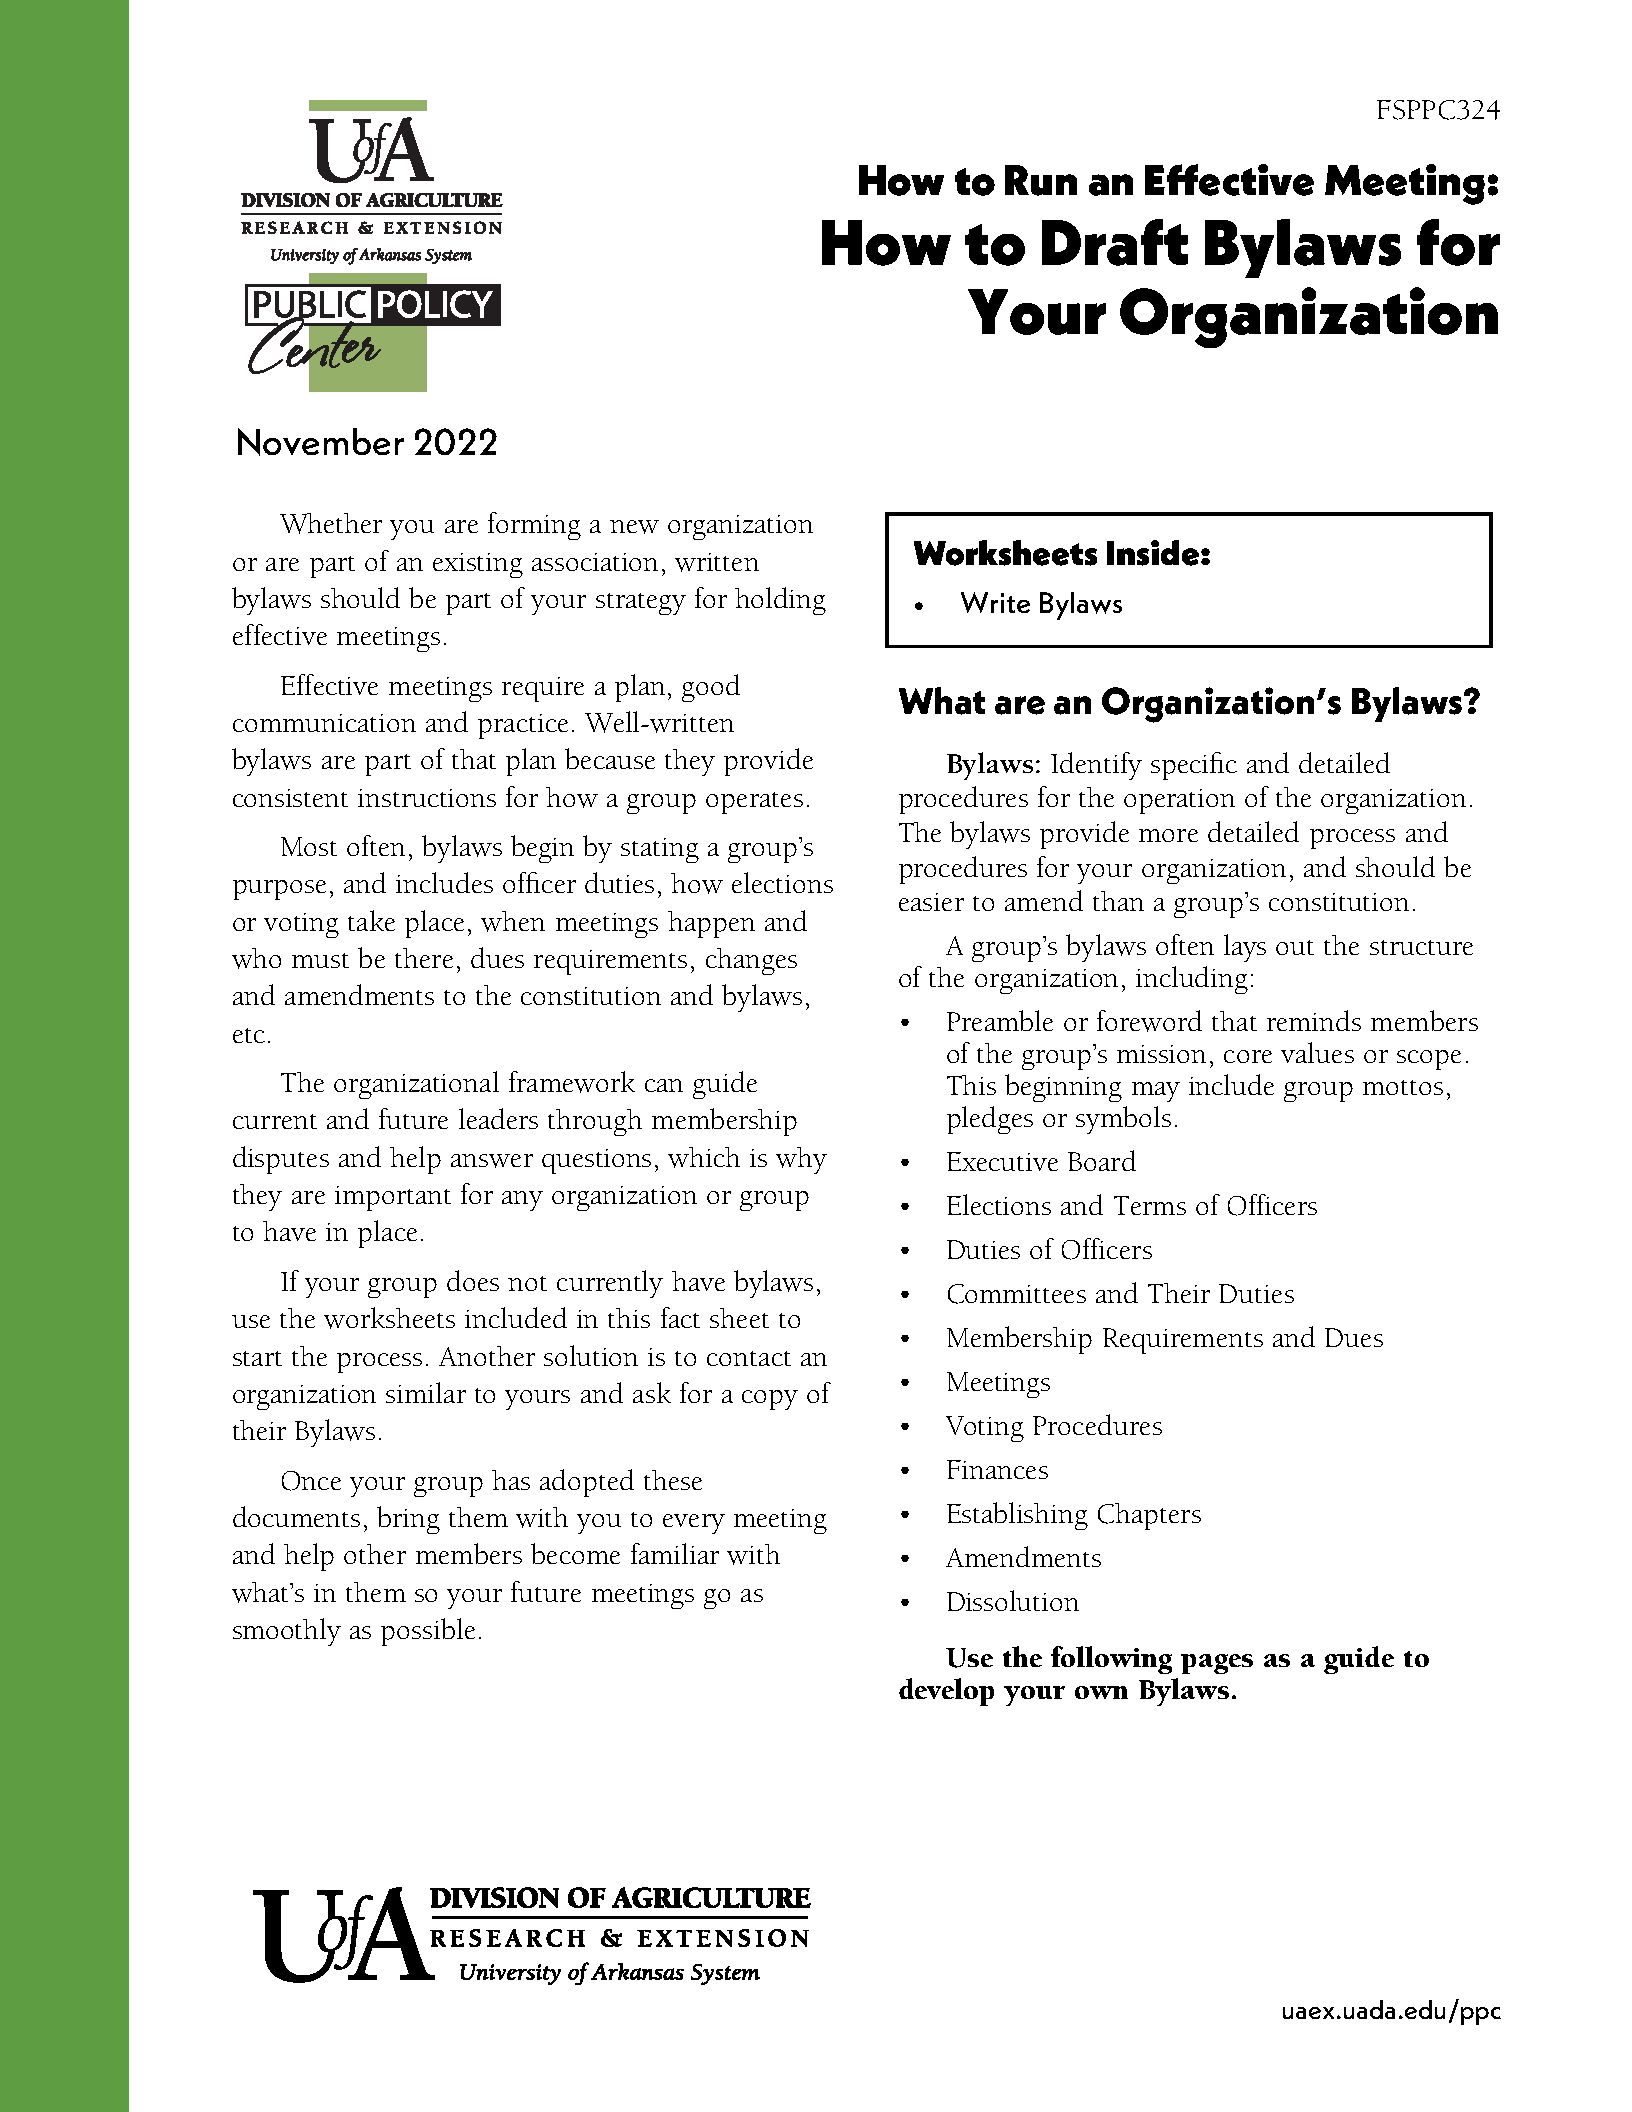 Front page of How to Draft Bylaws for Your Organization Fact Sheet